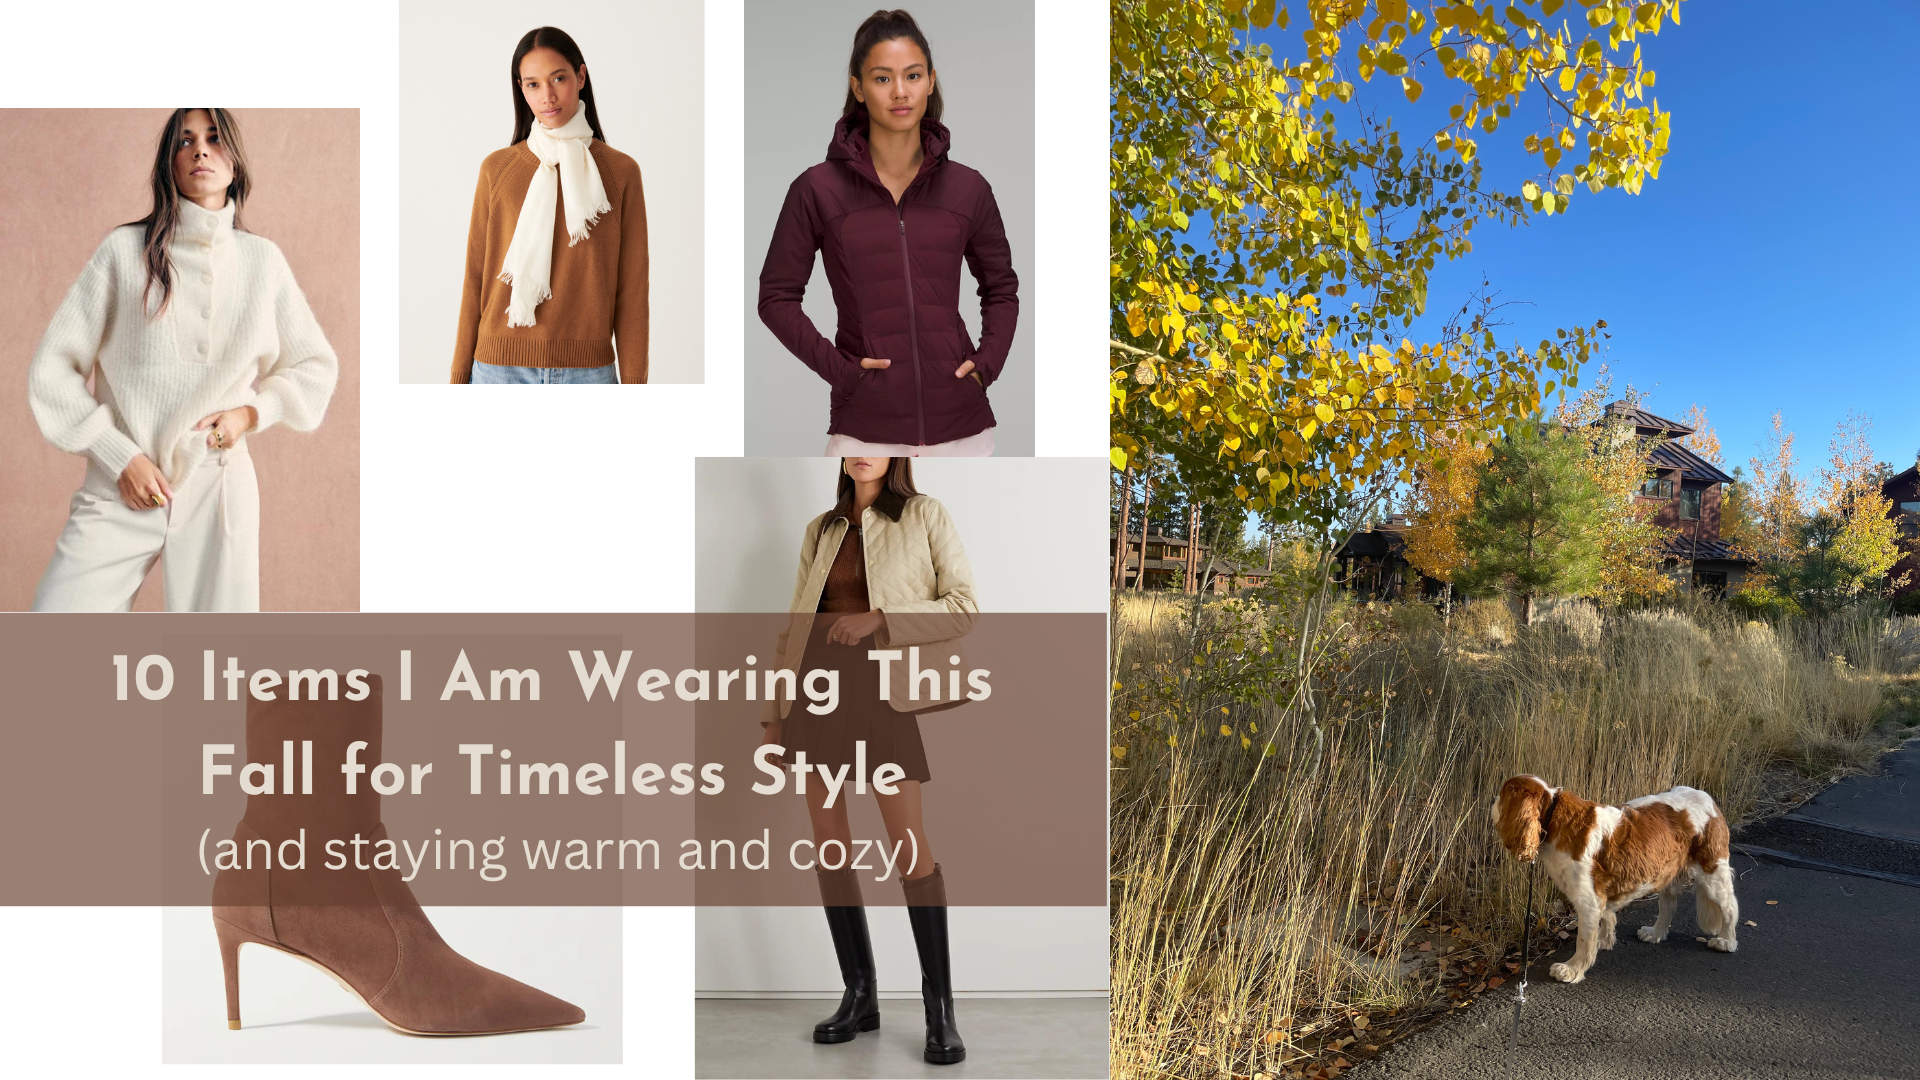 342: 10 Items I Am Wearing This Fall For Timeless Style (and to stay warm and cozy)